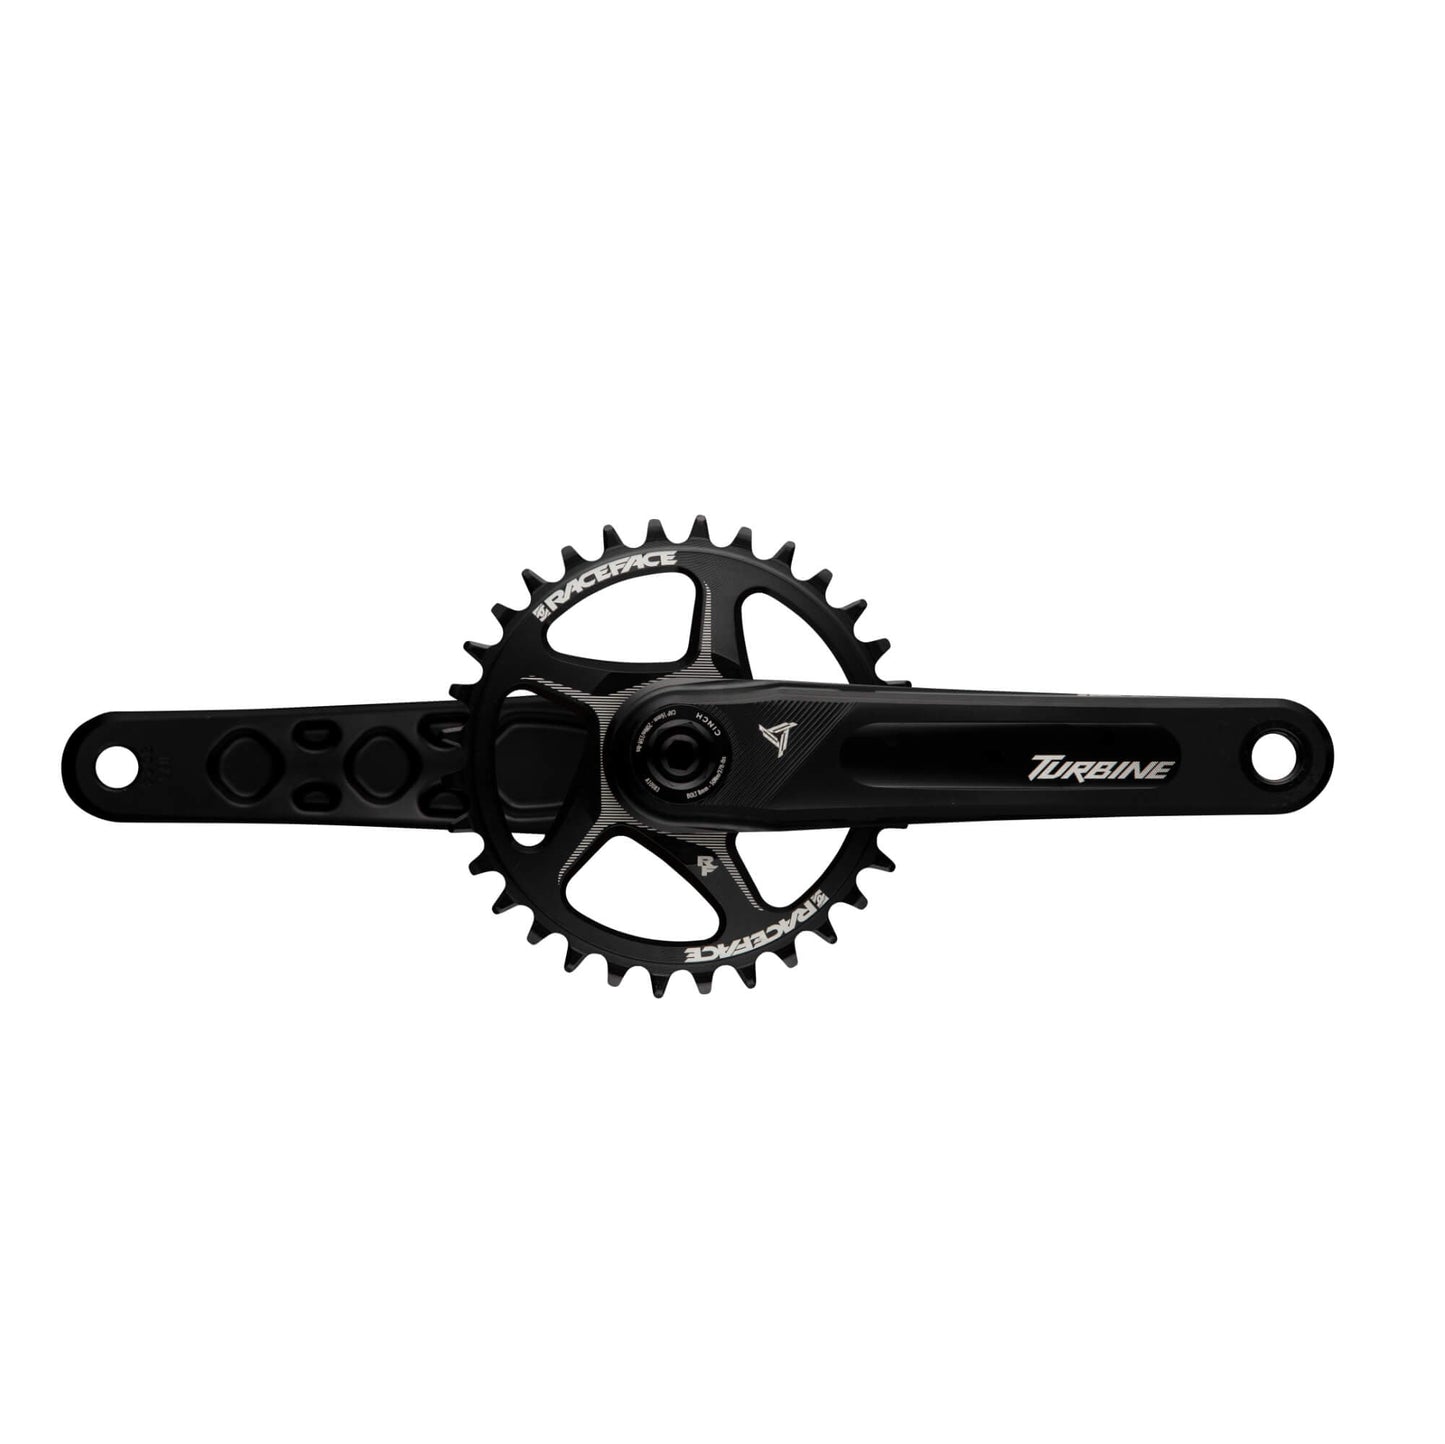 Race Face Turbine Cranks (Arms Only) 143mm Spindle Size - 175mm Length (55.5mm chainline)